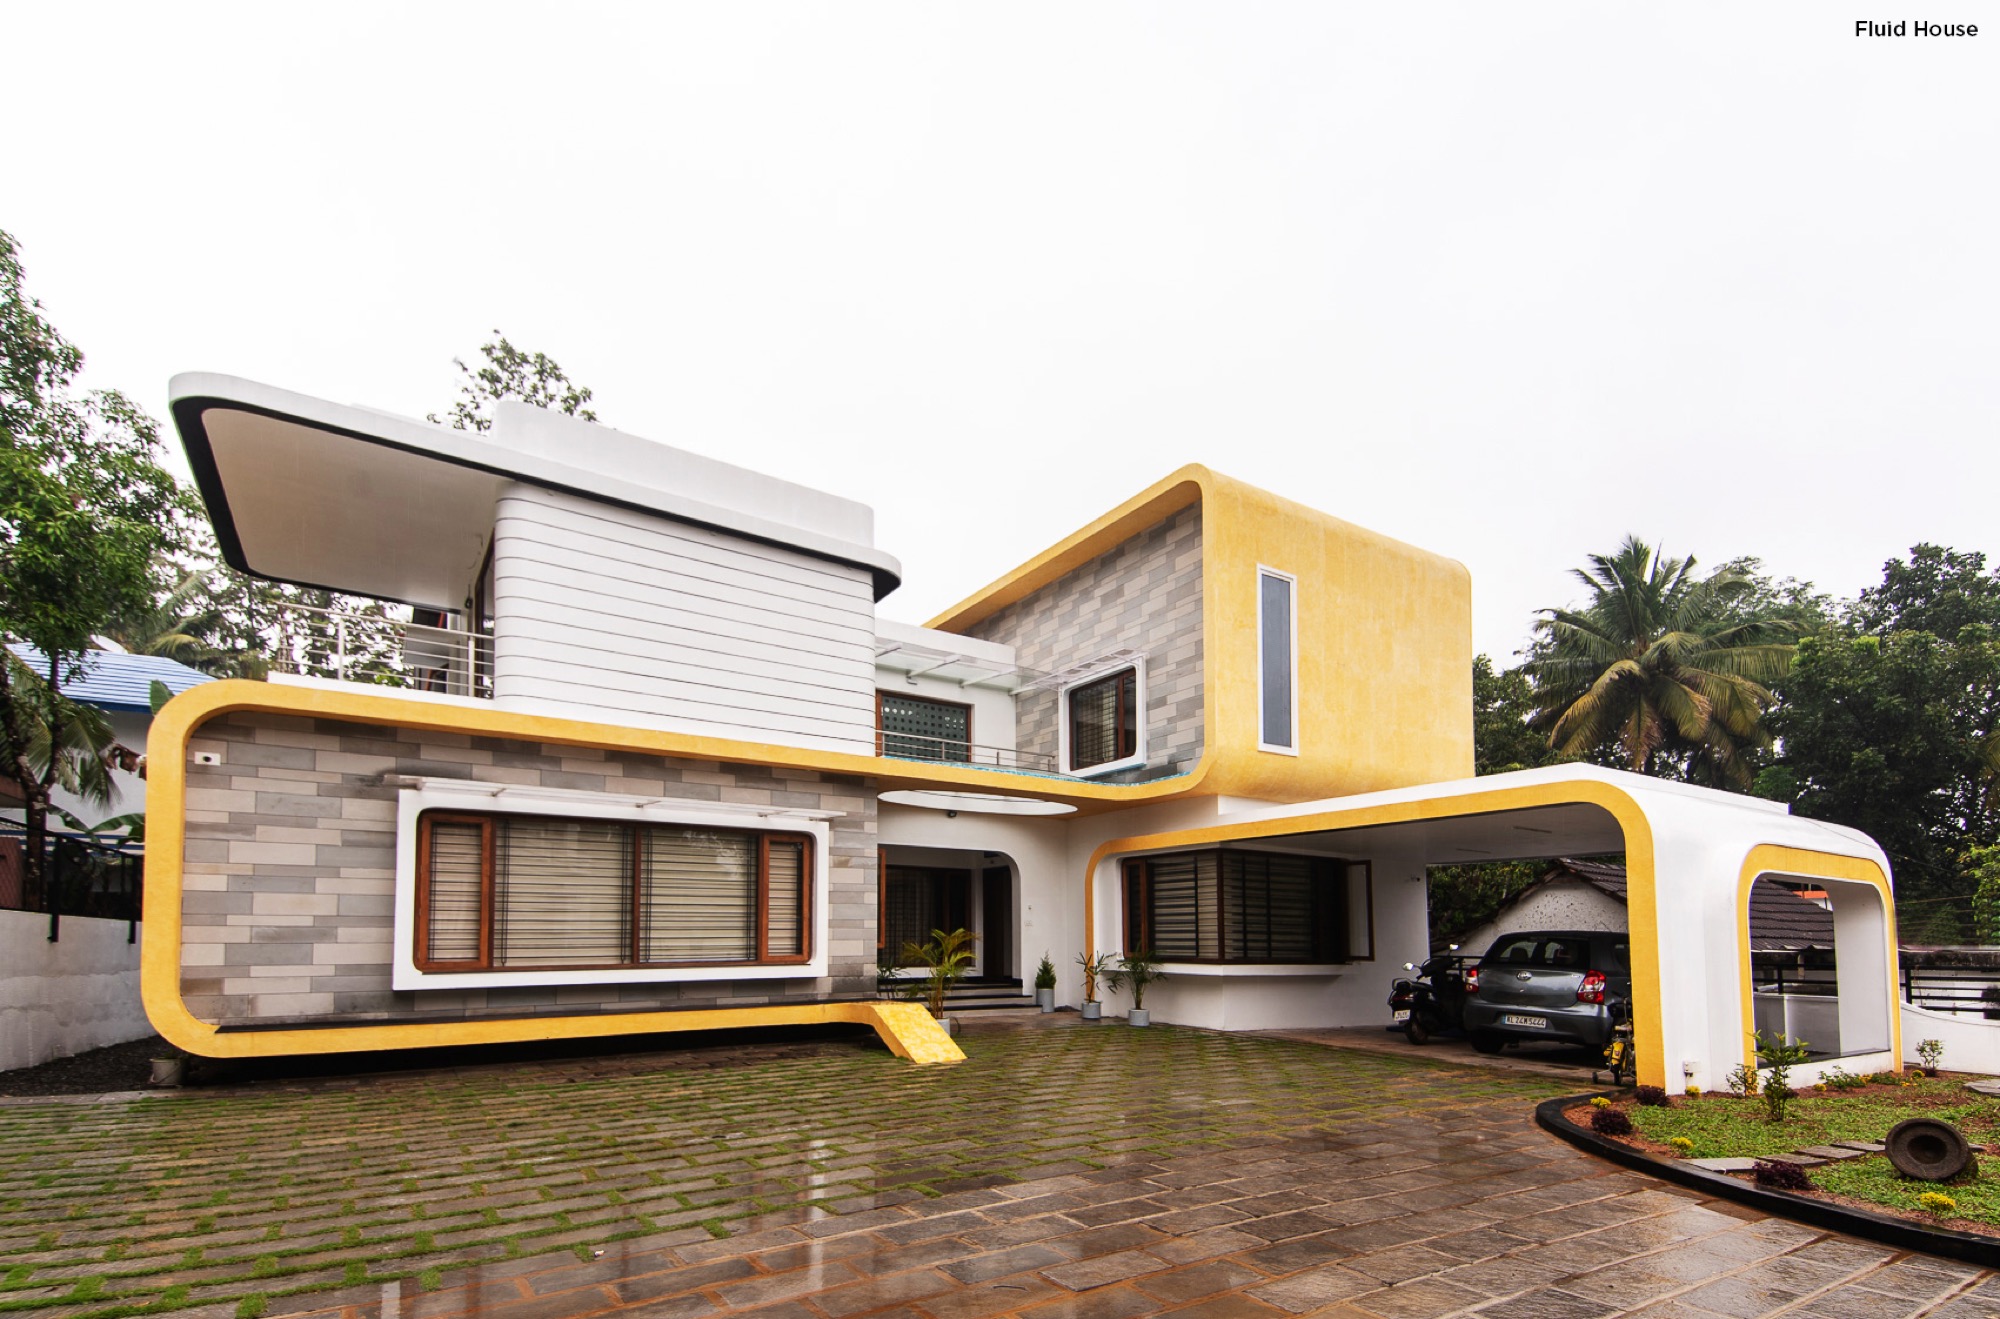 Residence for Dr. Gerald and Anila at Kottayam designed by MySpace Architects